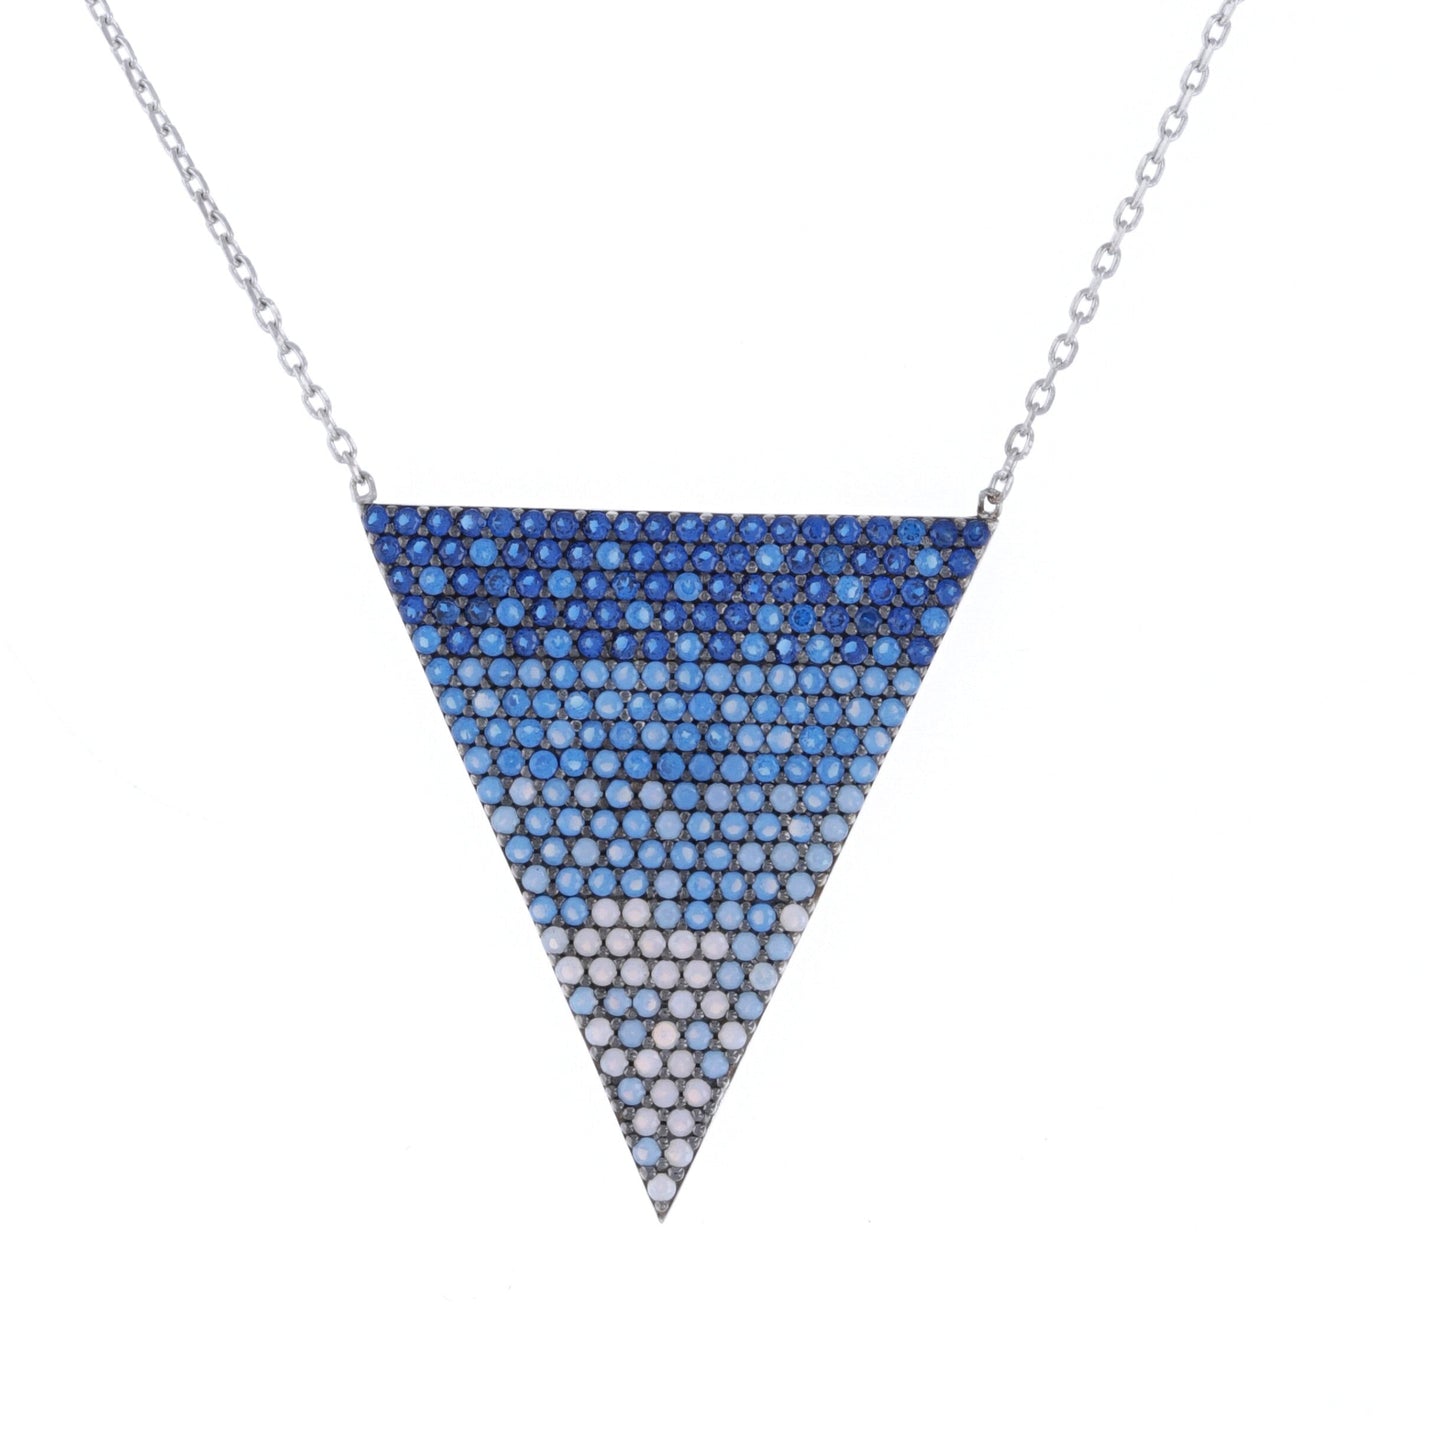 Blue Triangle Necklace